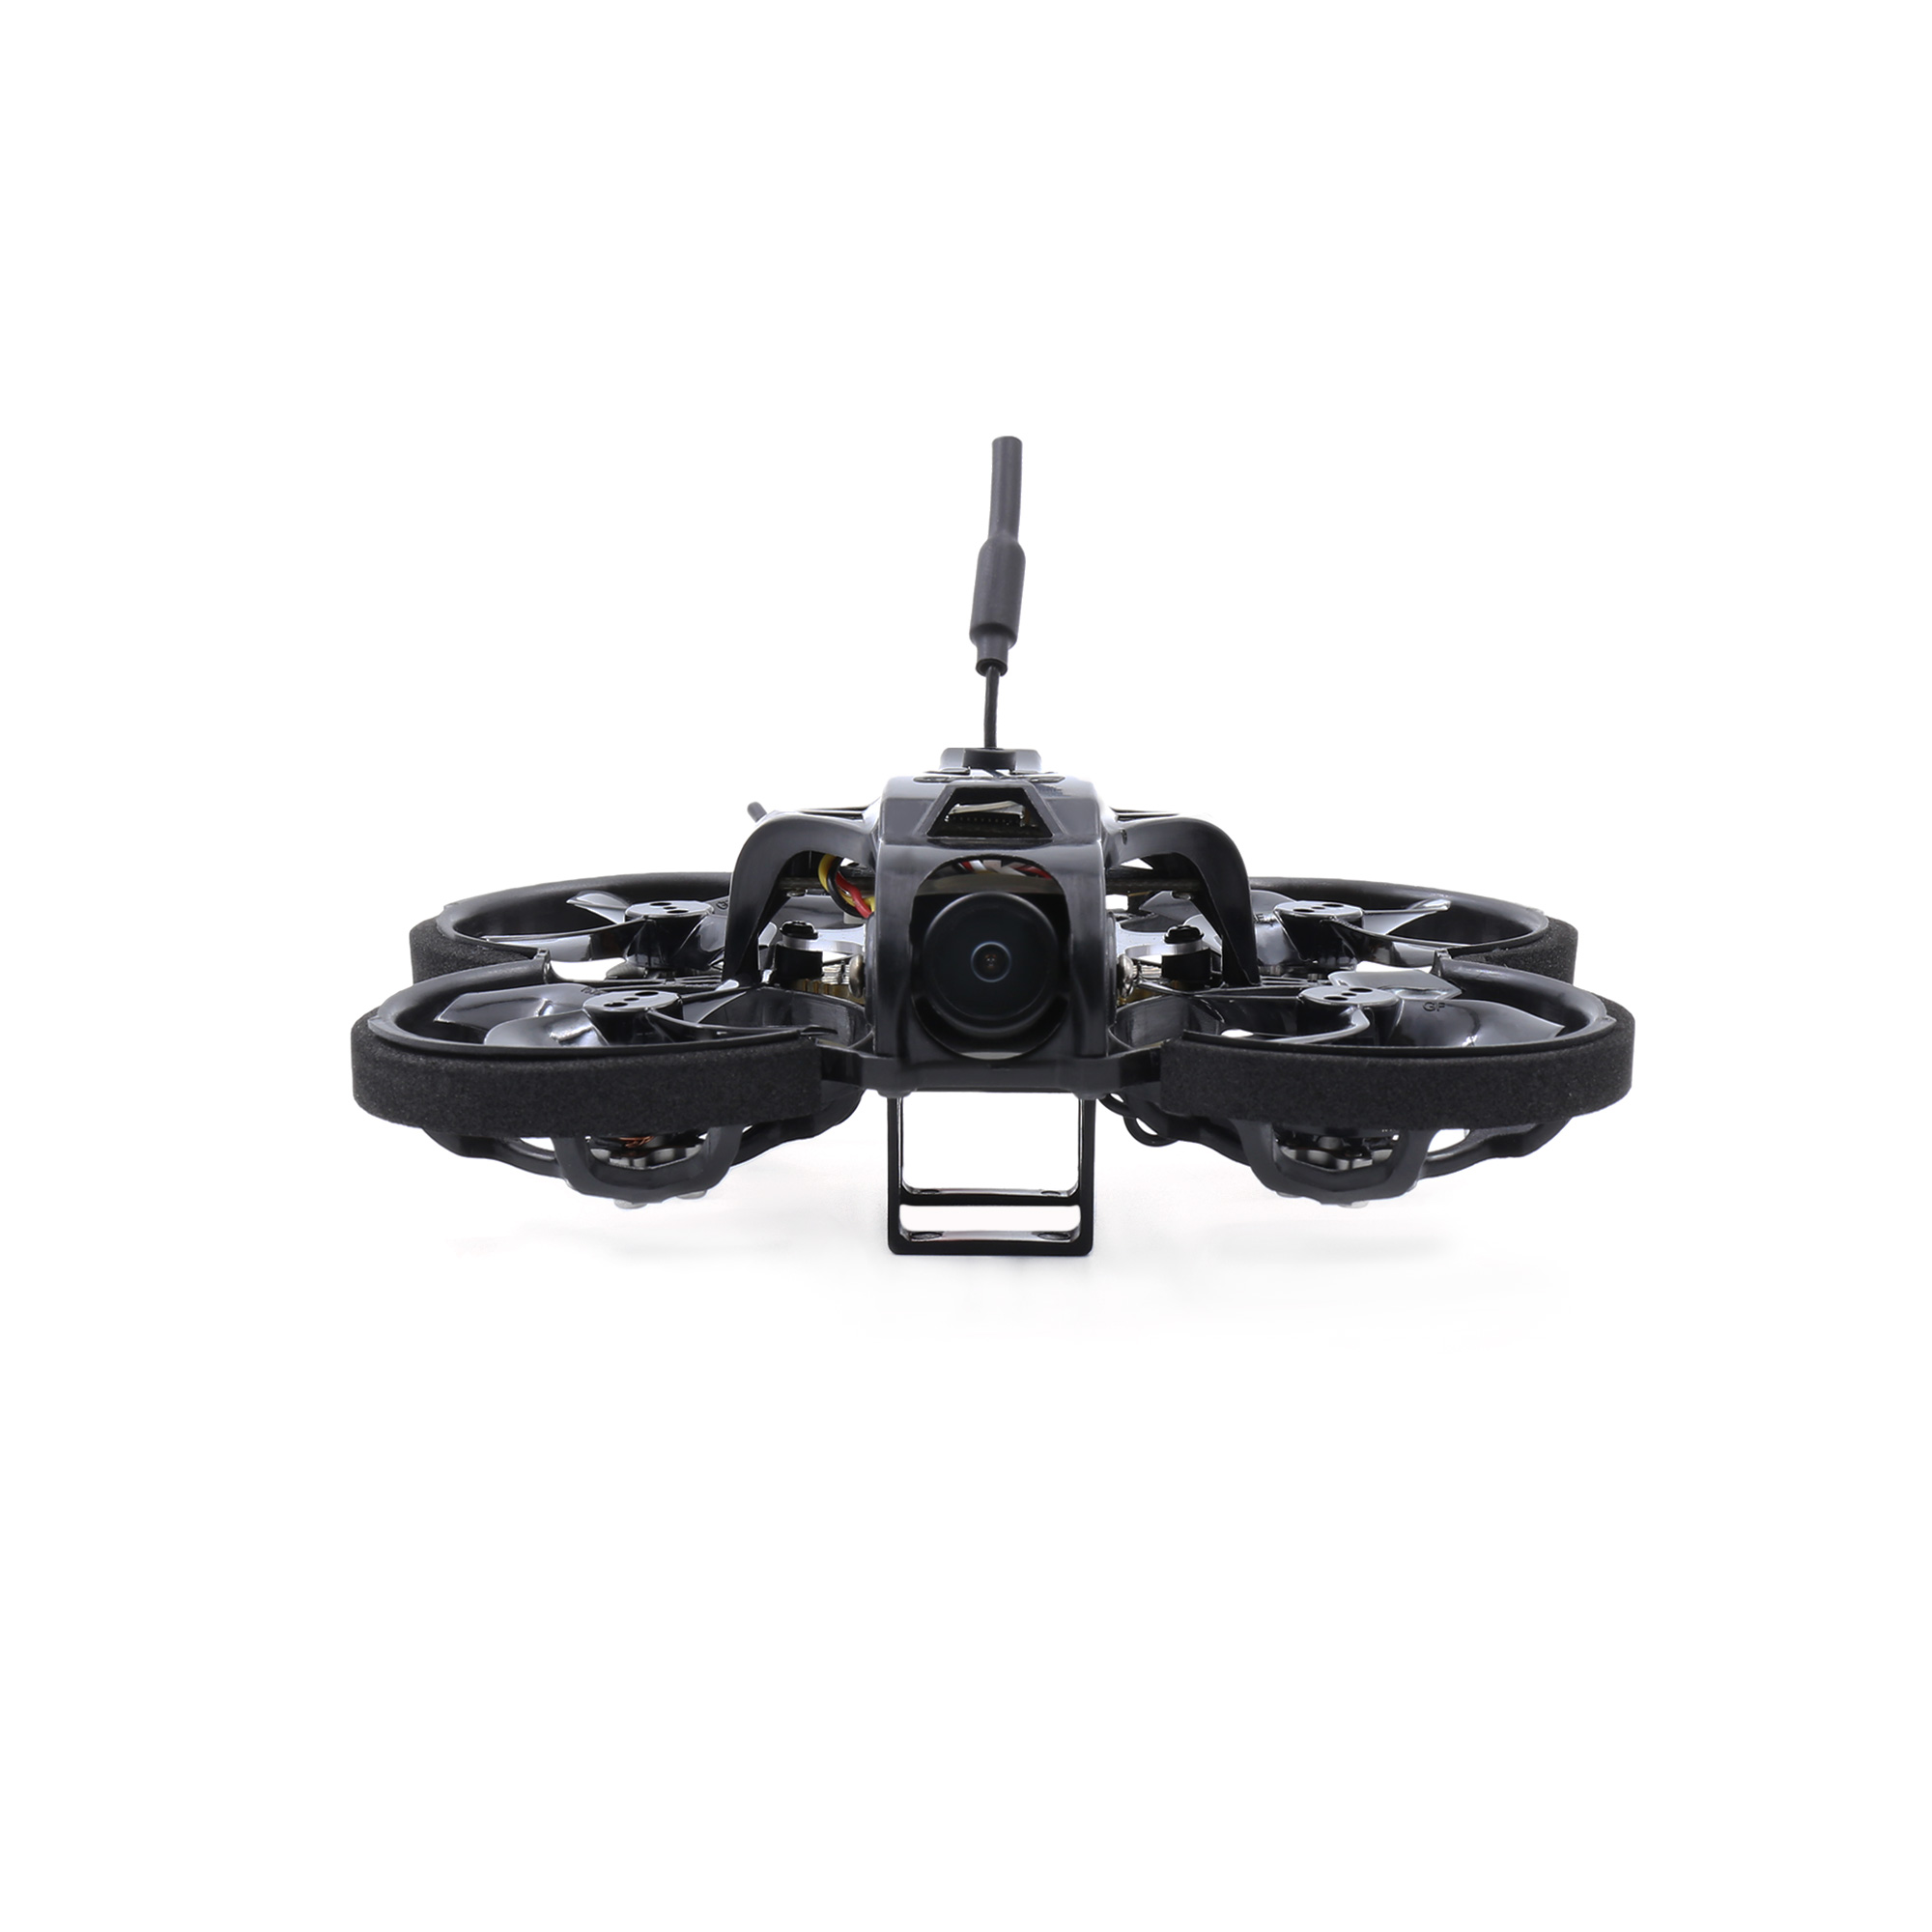 GEPRC TinyGO 1.6inch 2S FPV Indoor Whoop Runcam Nano2 +GR8 Remote Controller+RG1 Goggles RTF Ready To Fly FPV Racing RC Drone 6